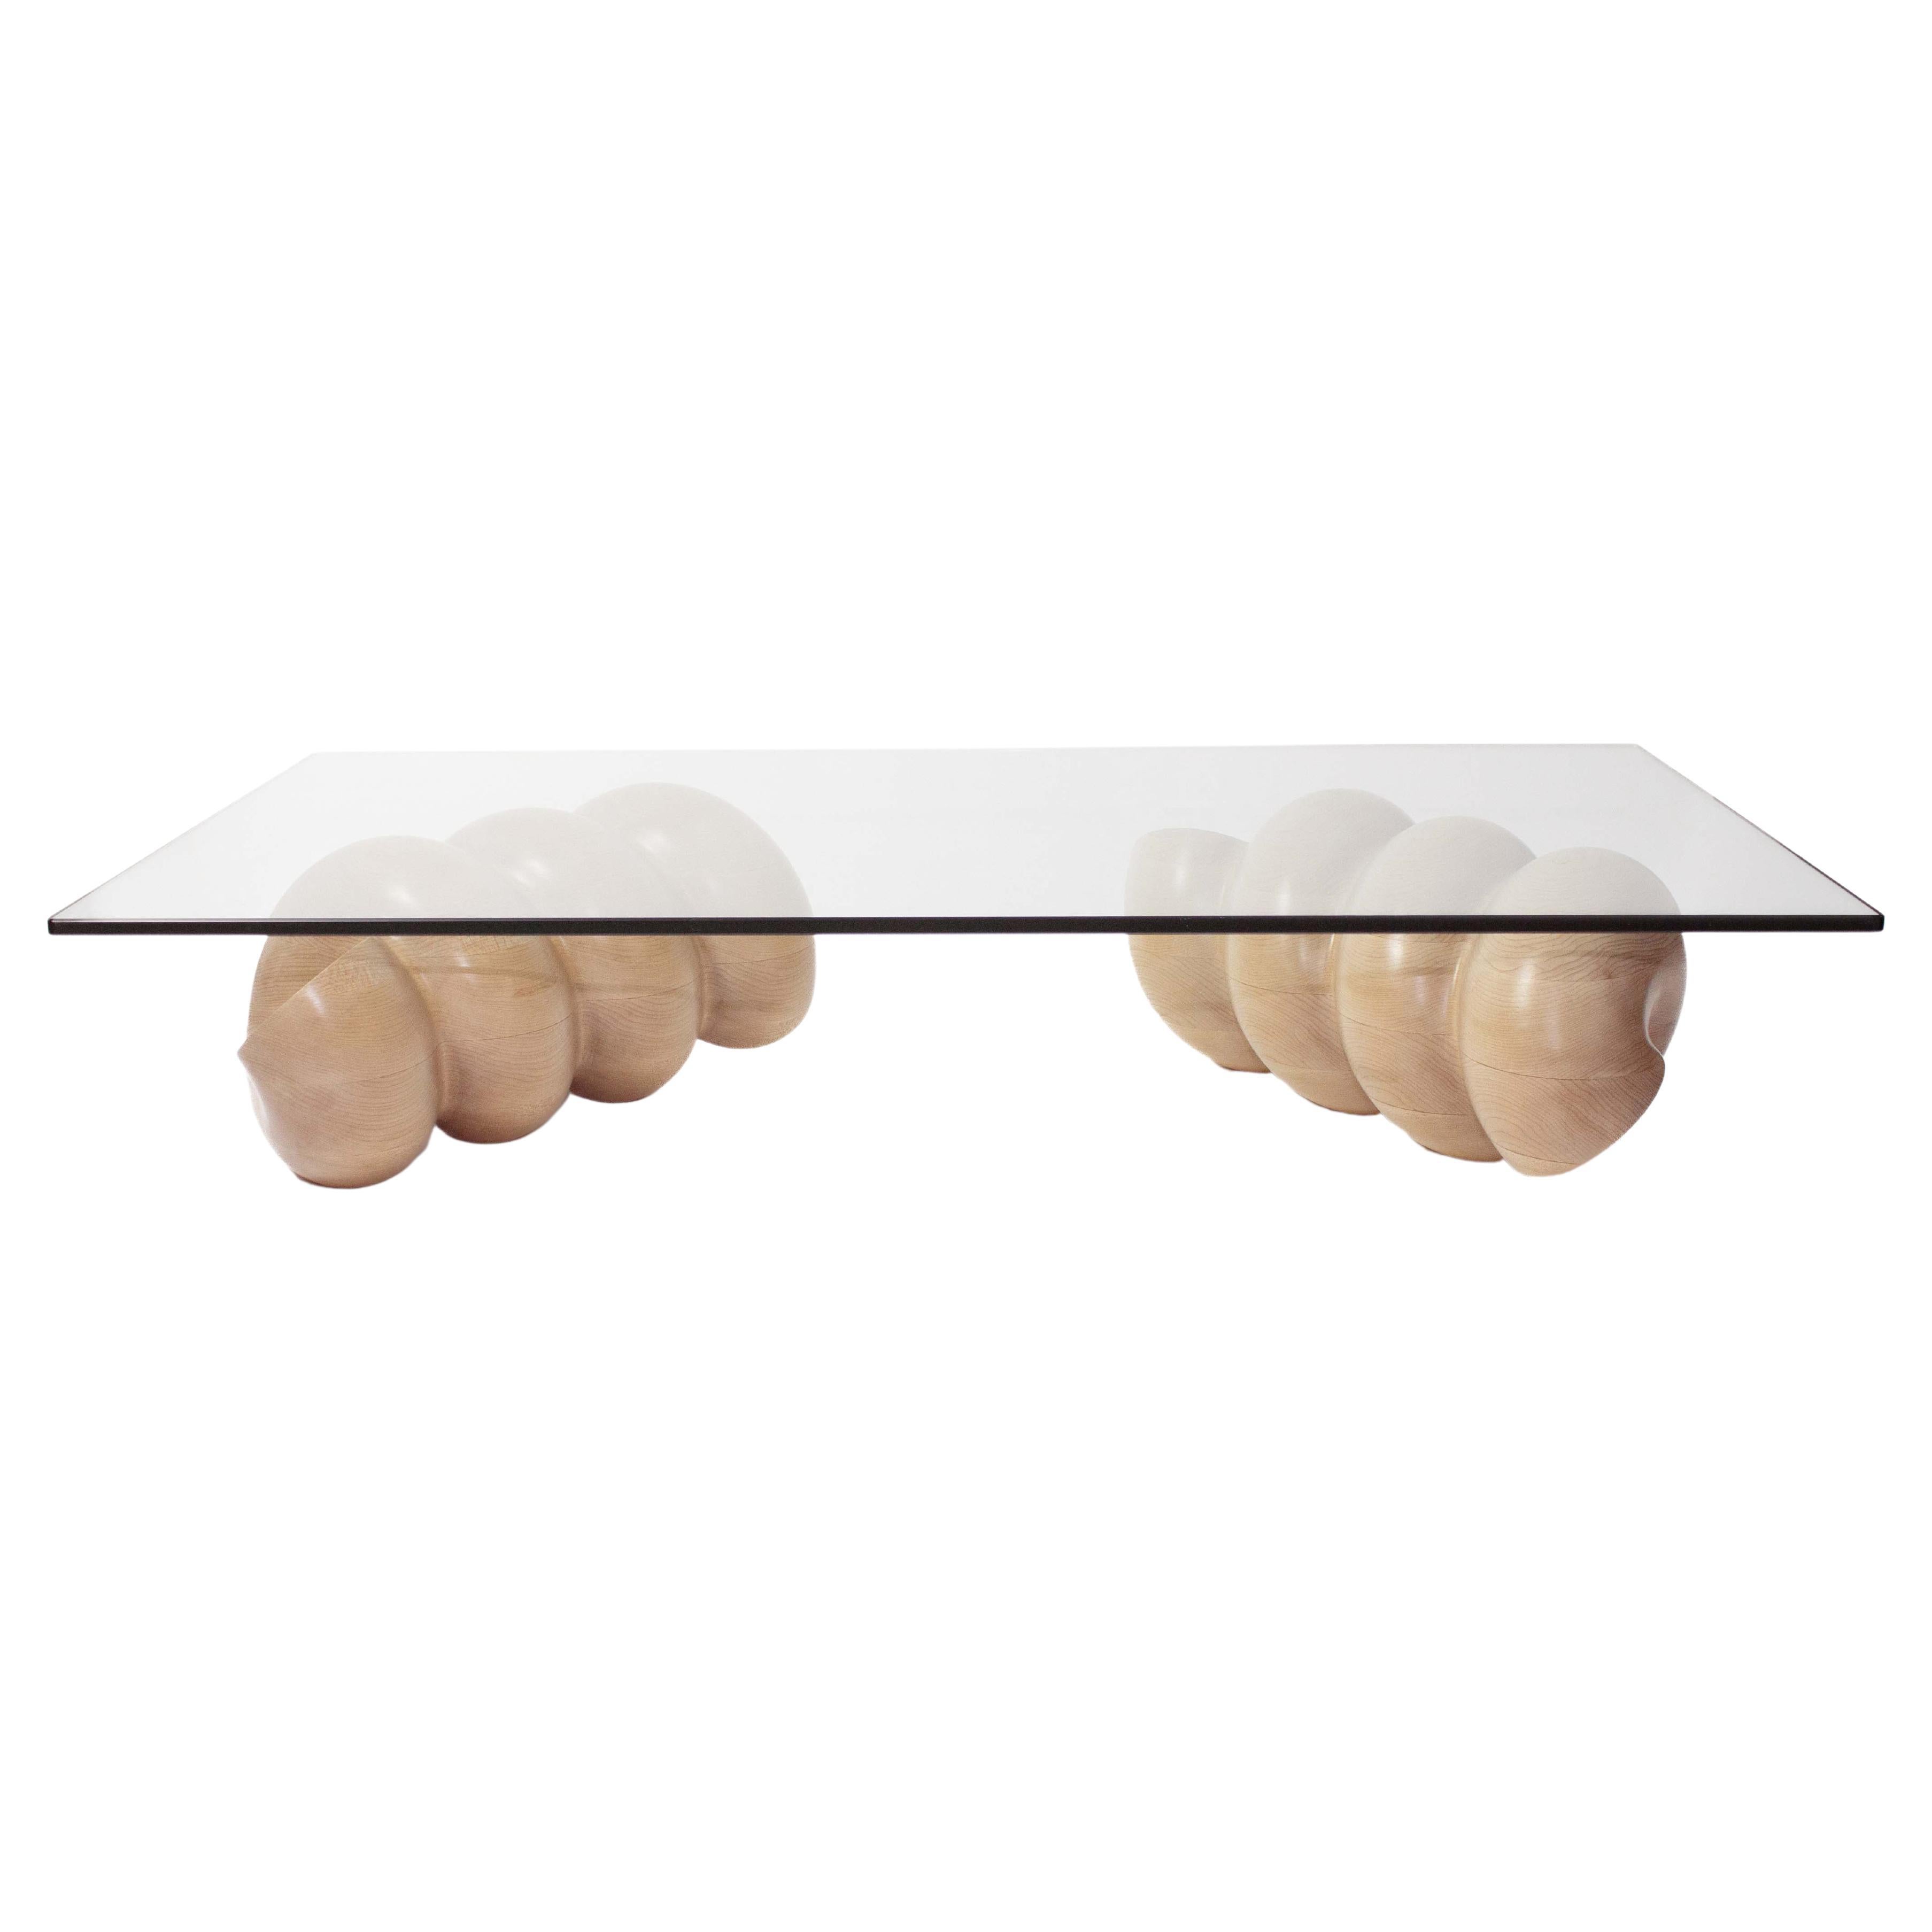 Cavatappi Rectangular Glass-Topped Coffee Table with Sculptural Wood Base For Sale